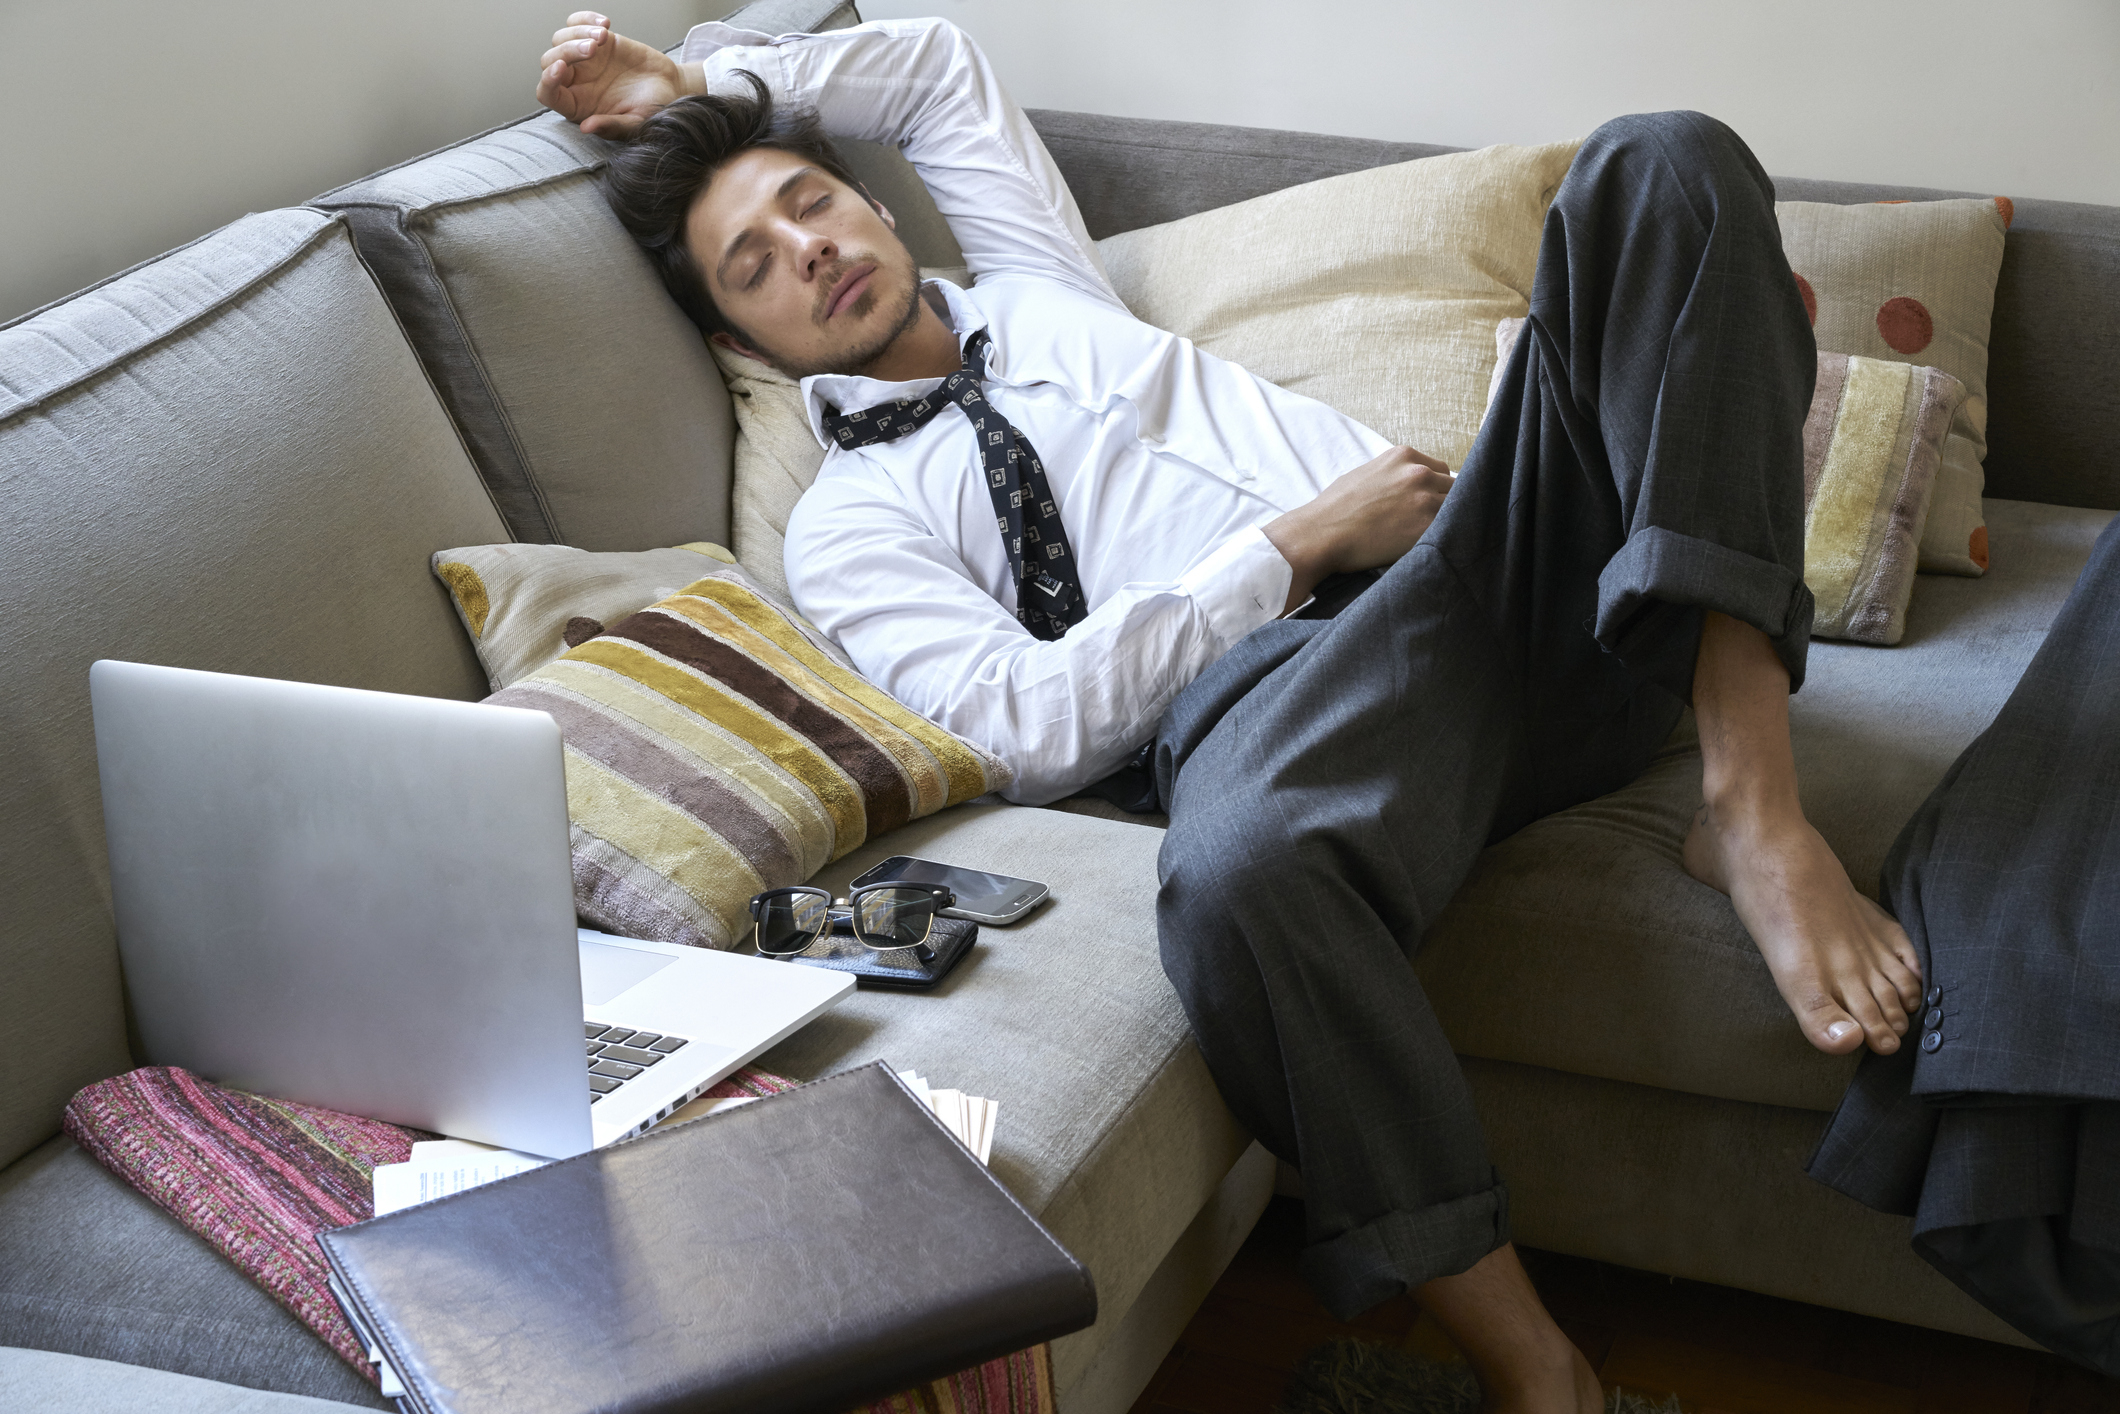 Person in business attire napping on couch with laptop and notebook nearby